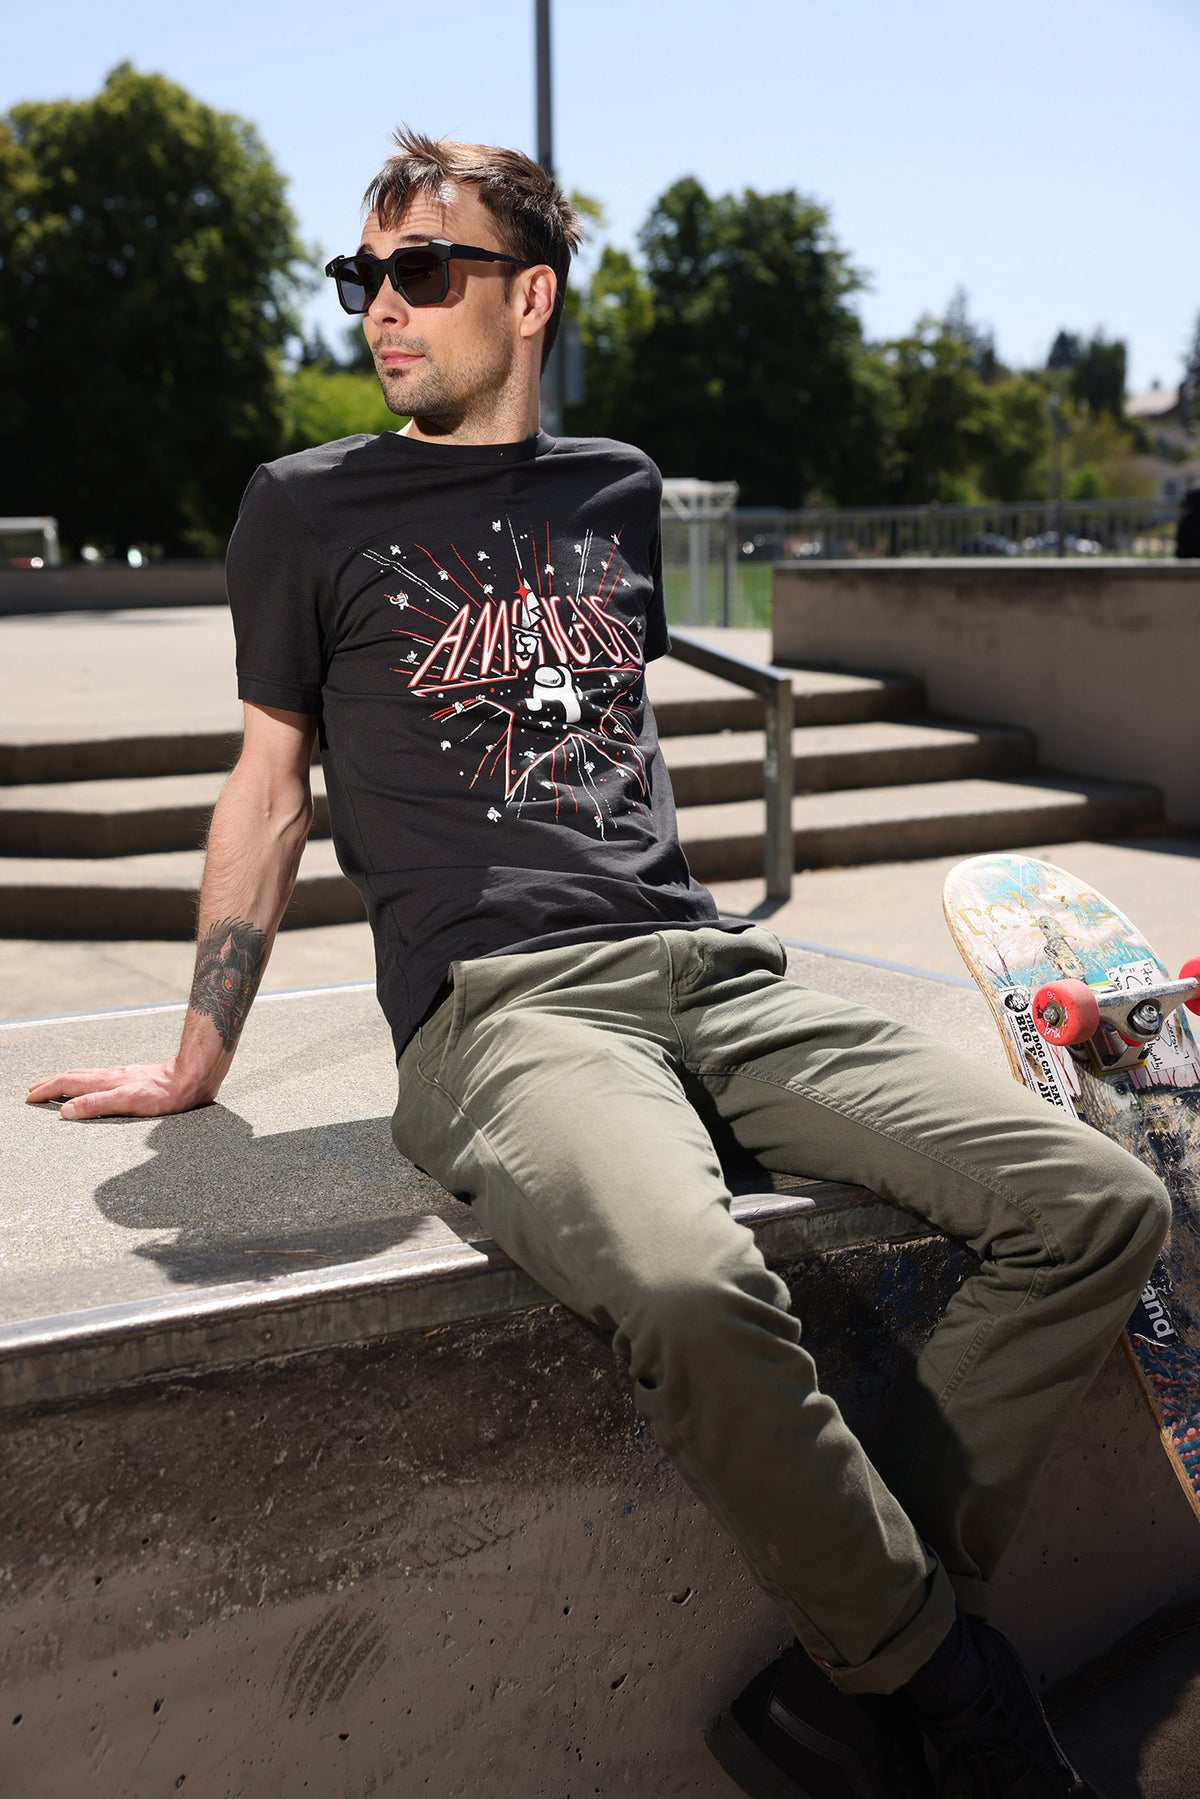 A nearly full-body photograph of a model wearing the Among Us: 5th Anniversary Tee. The model is sitting on a skateboard ramp looking over his shoulder. 